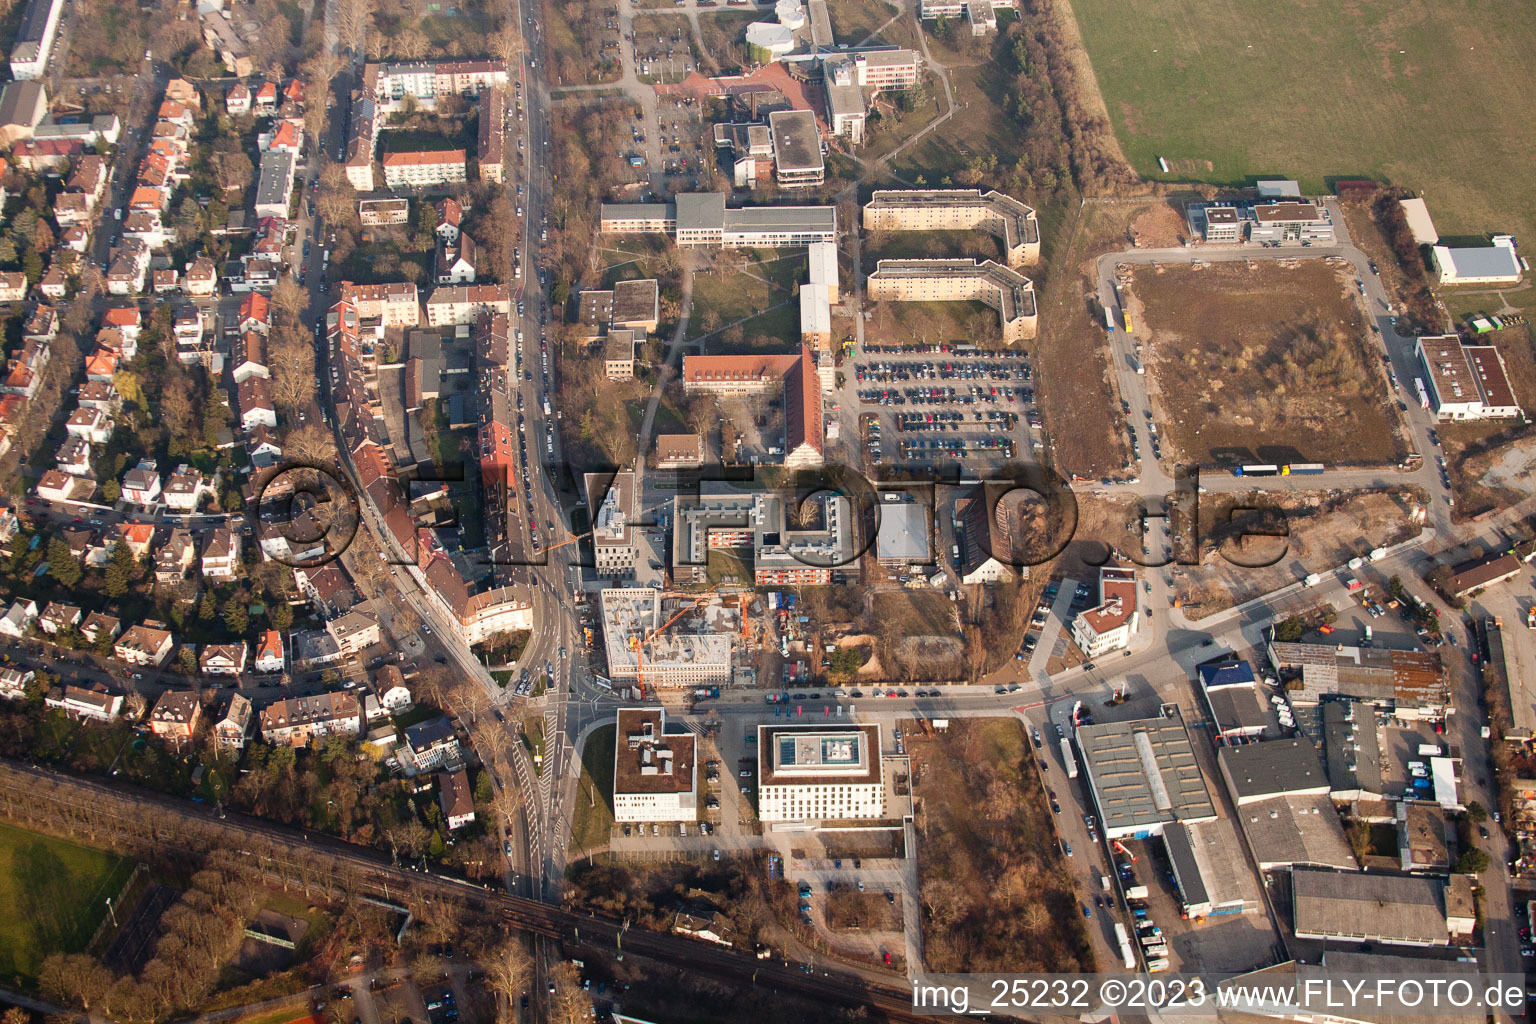 Aerial photograpy of Seckenheimer Landstr in the district Neuostheim in Mannheim in the state Baden-Wuerttemberg, Germany